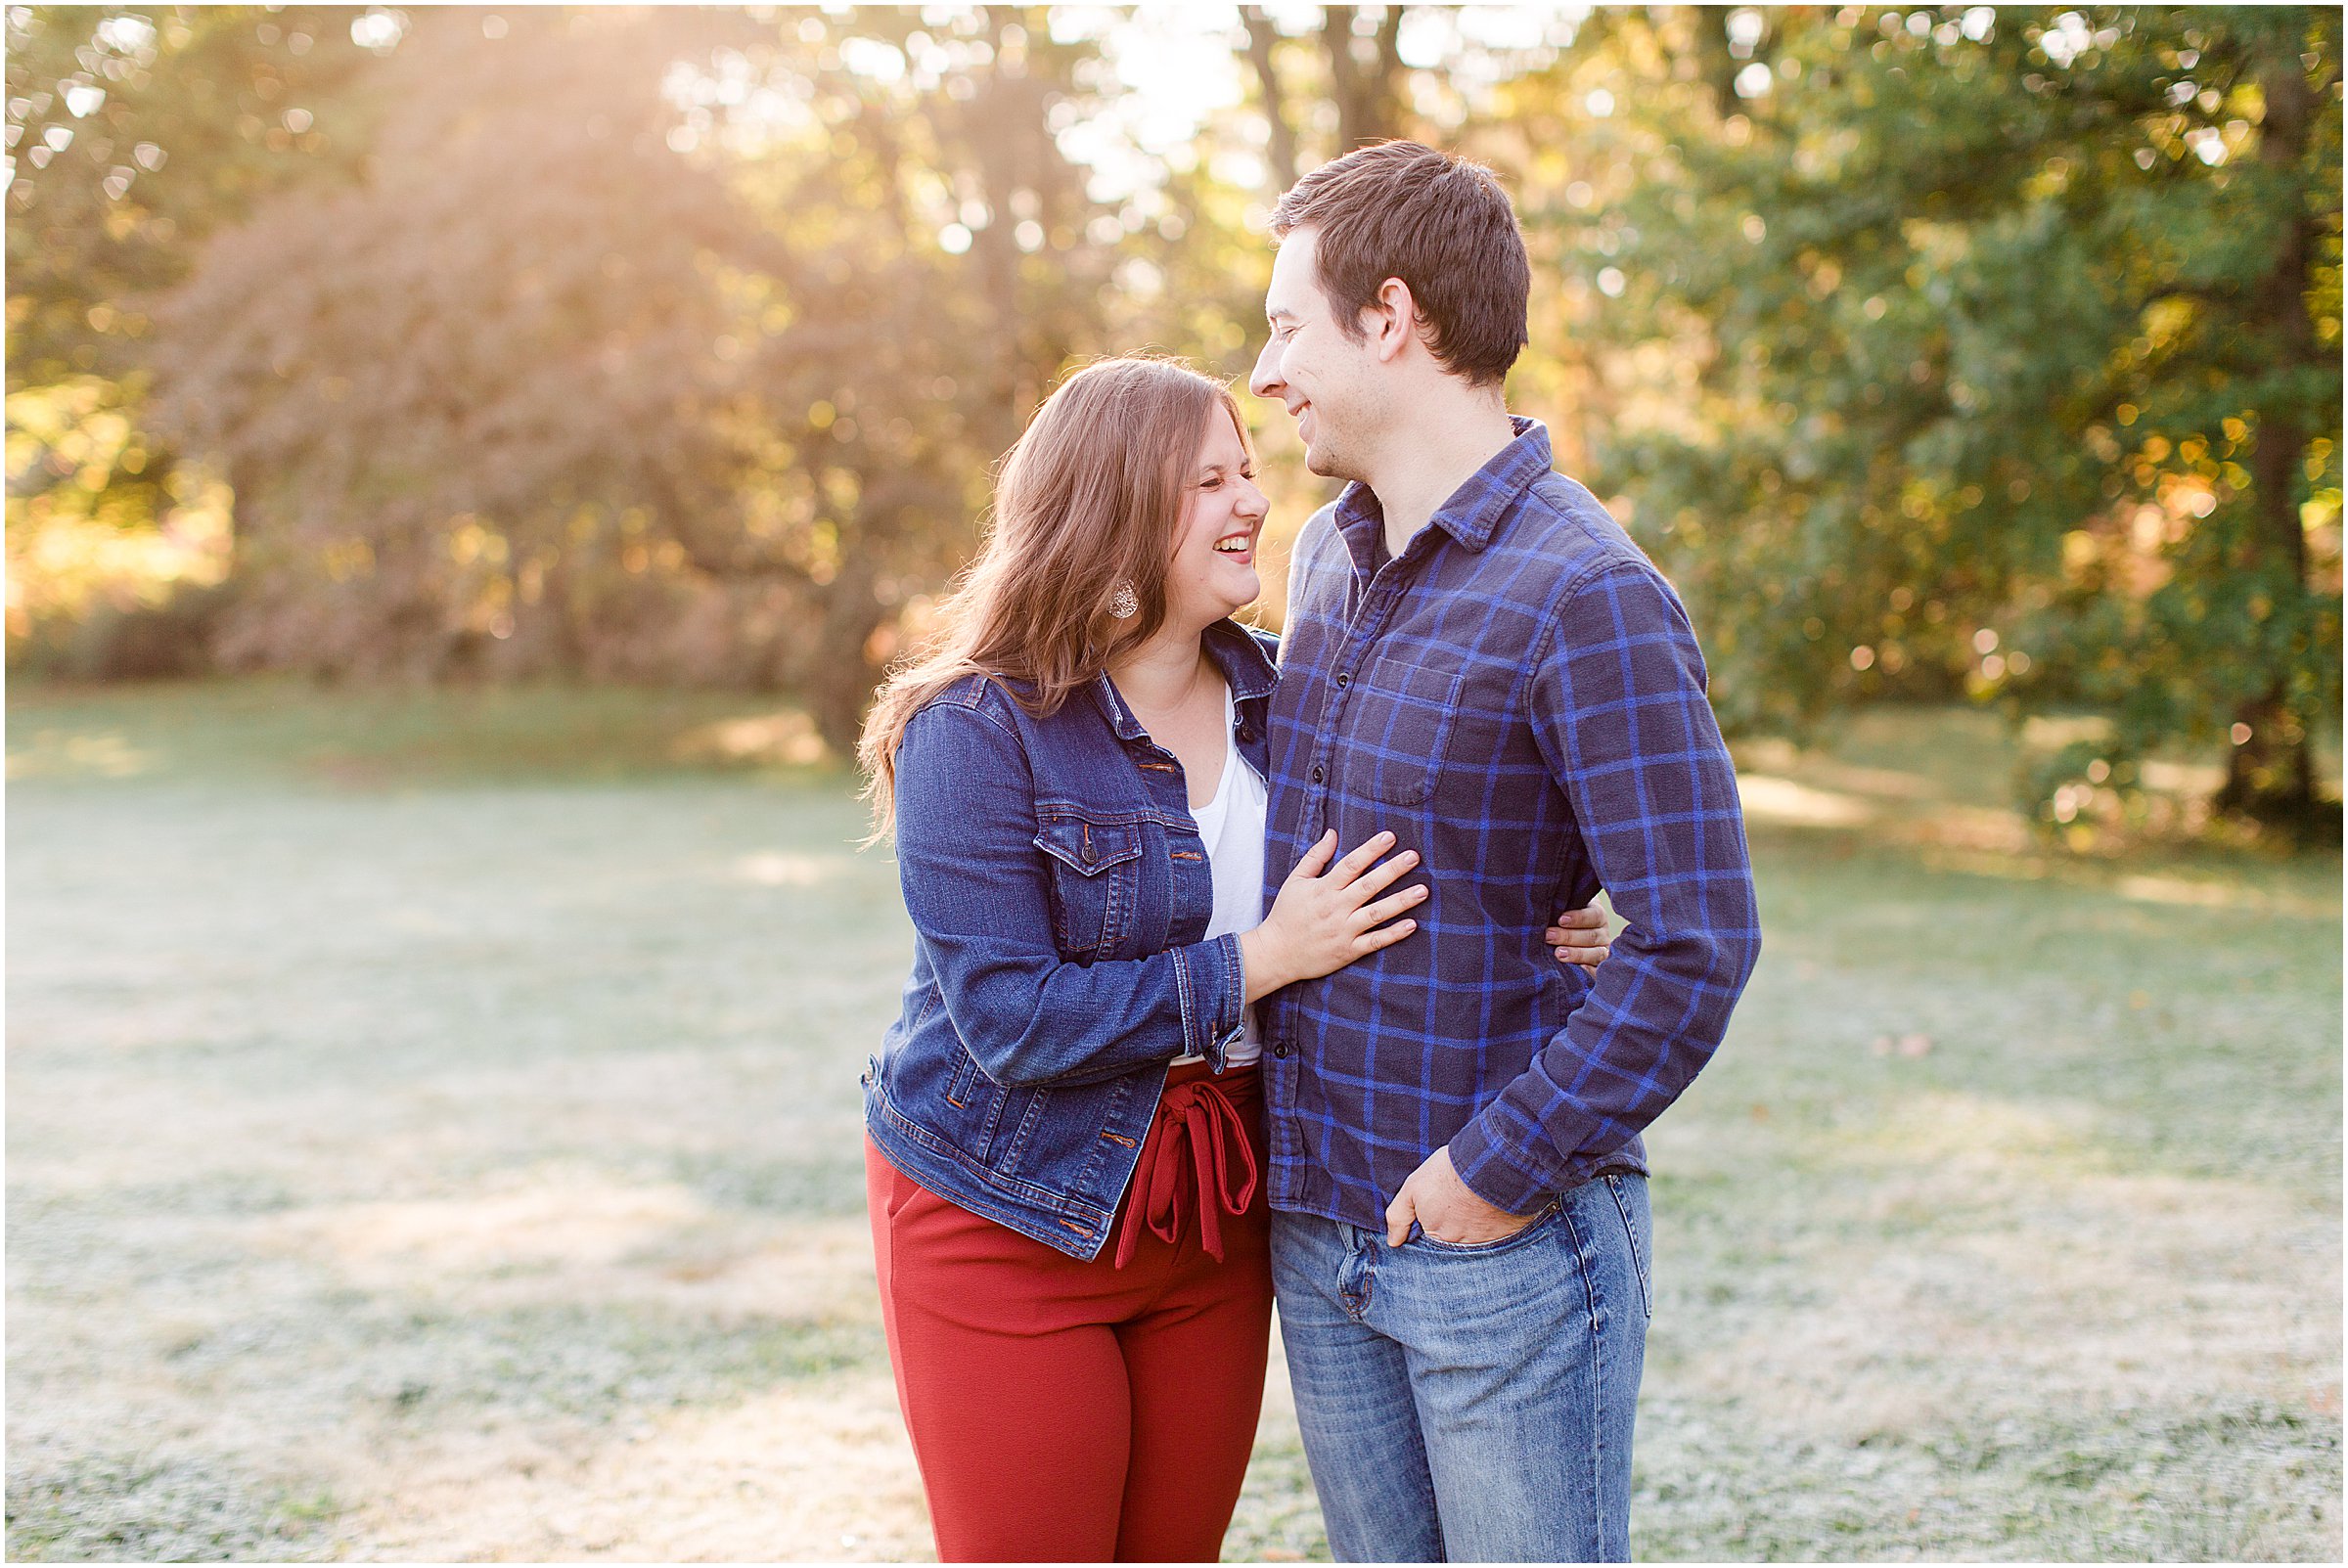 Holliday Park Engagement Session by Sami Renee_0002.jpg